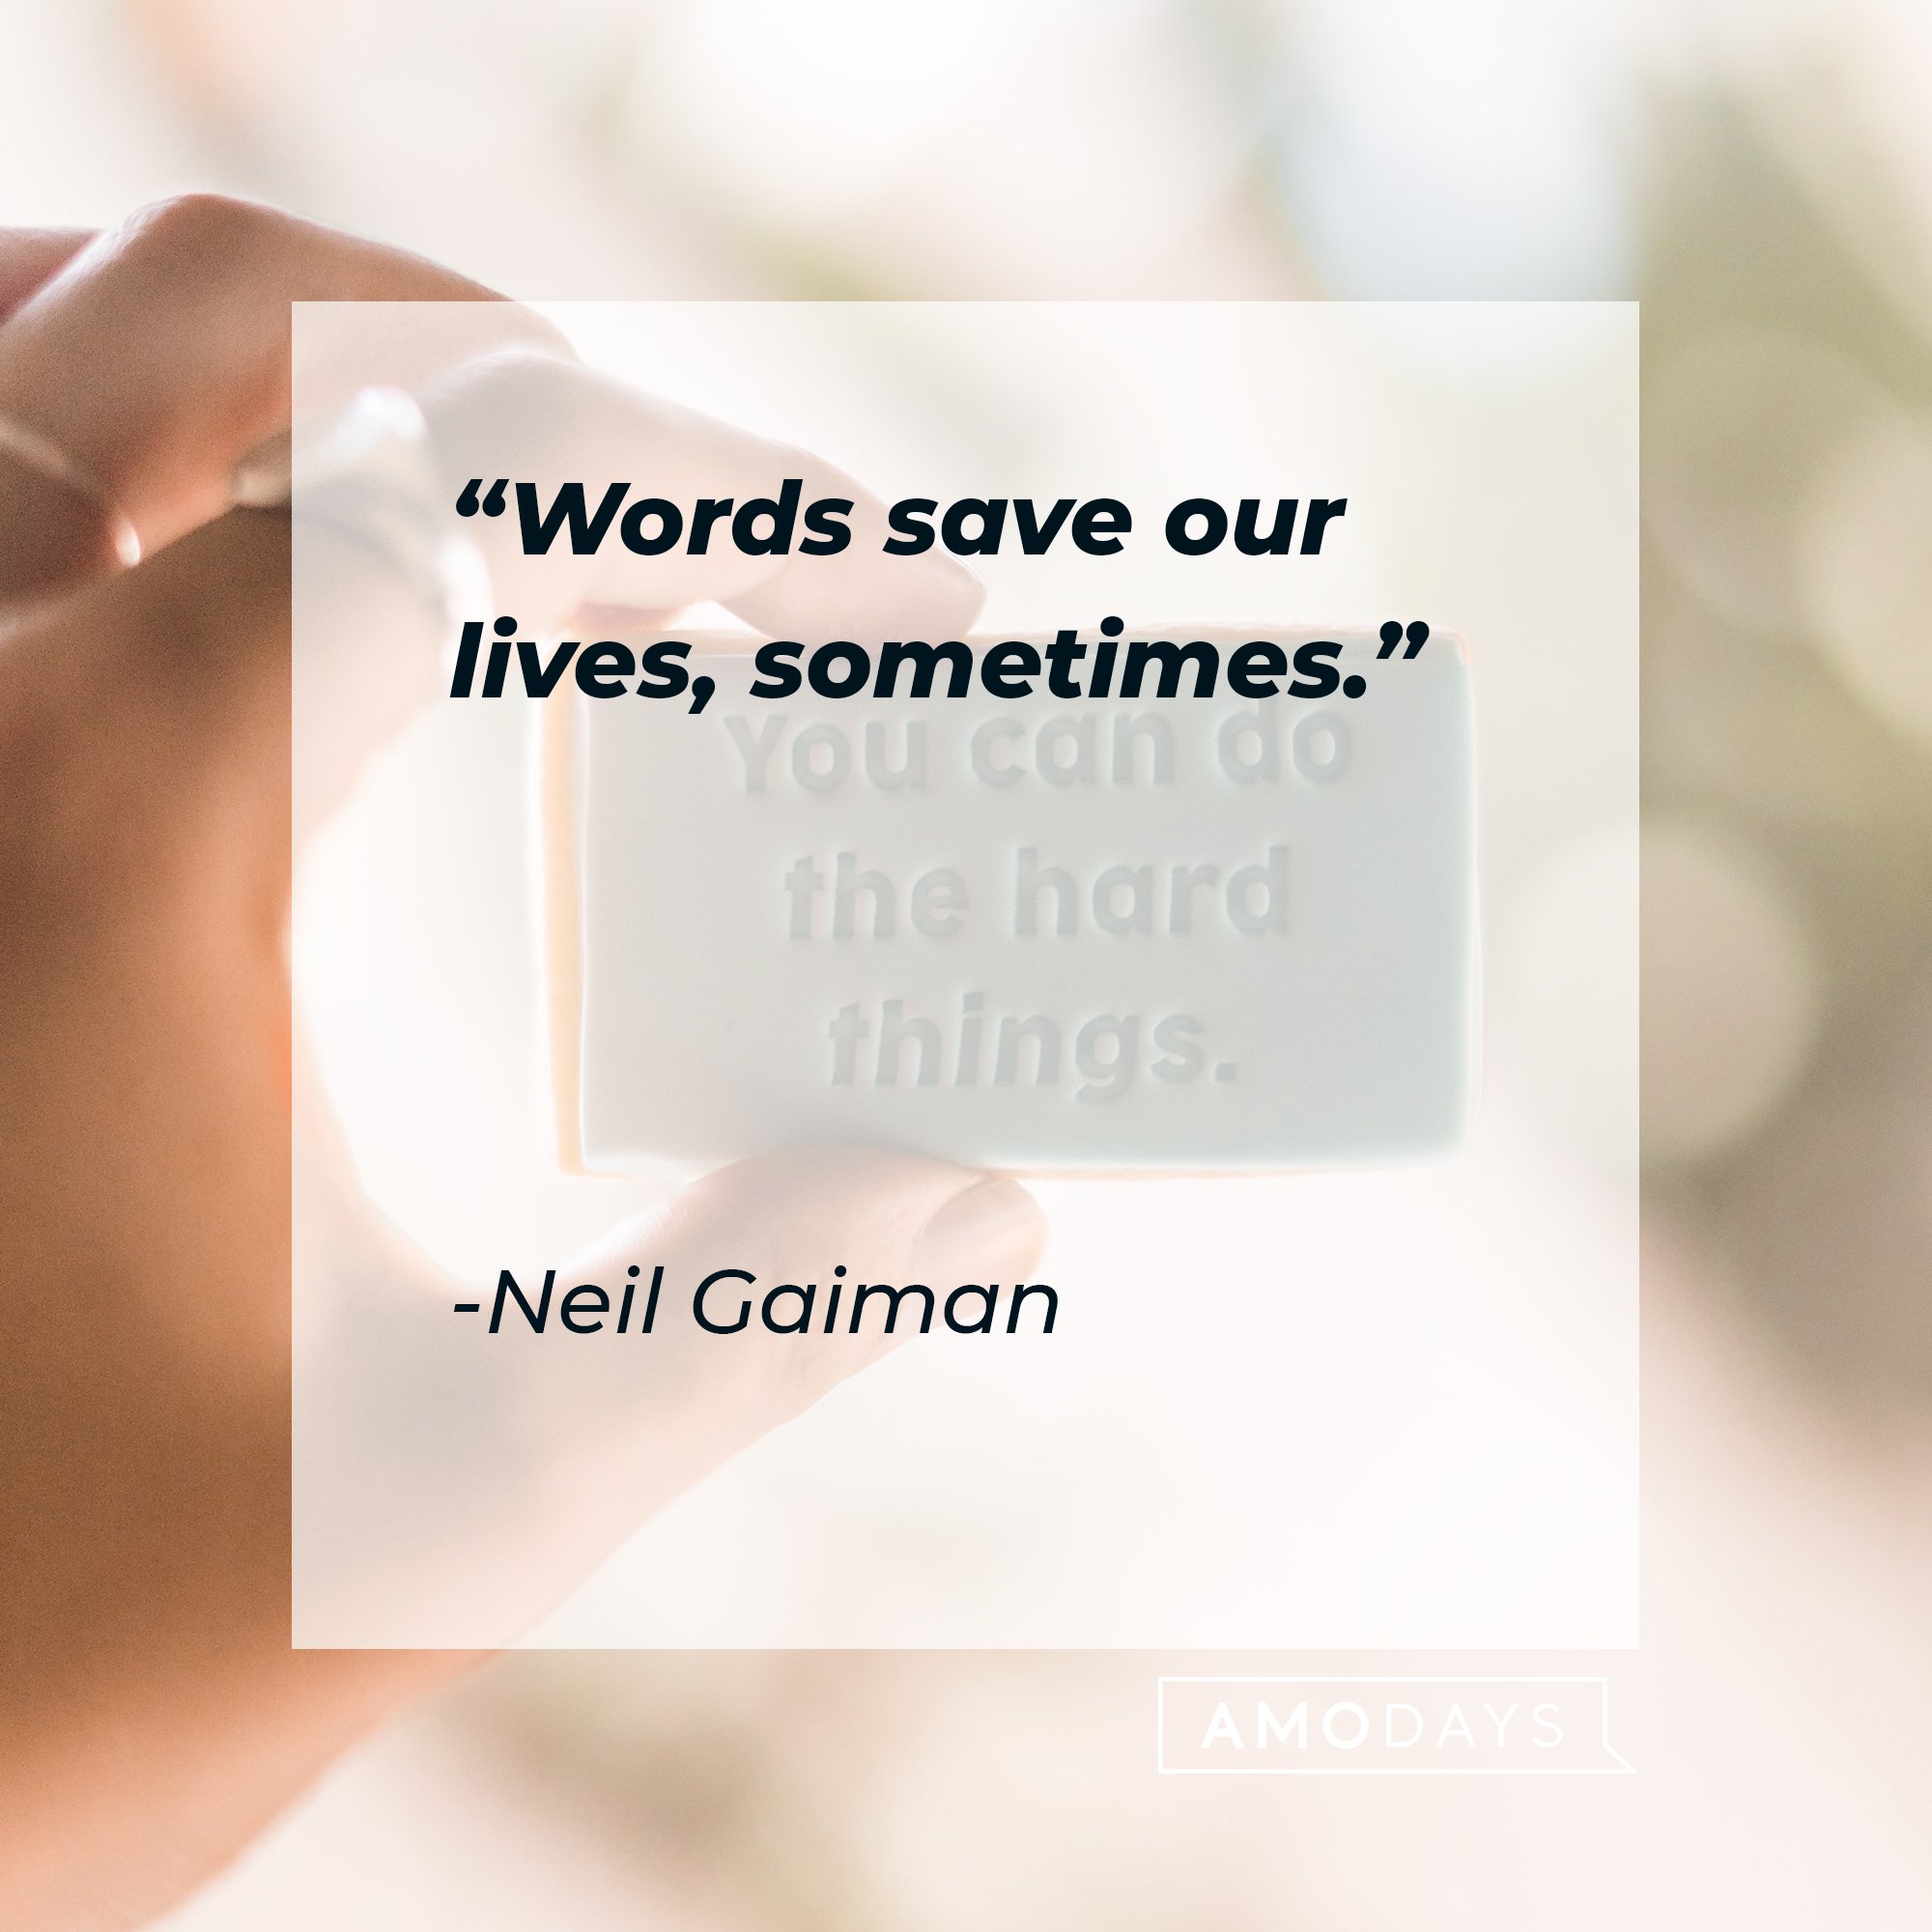  Neil Gaiman's quote: "Words save our lives, sometimes." | Image: AmoDays